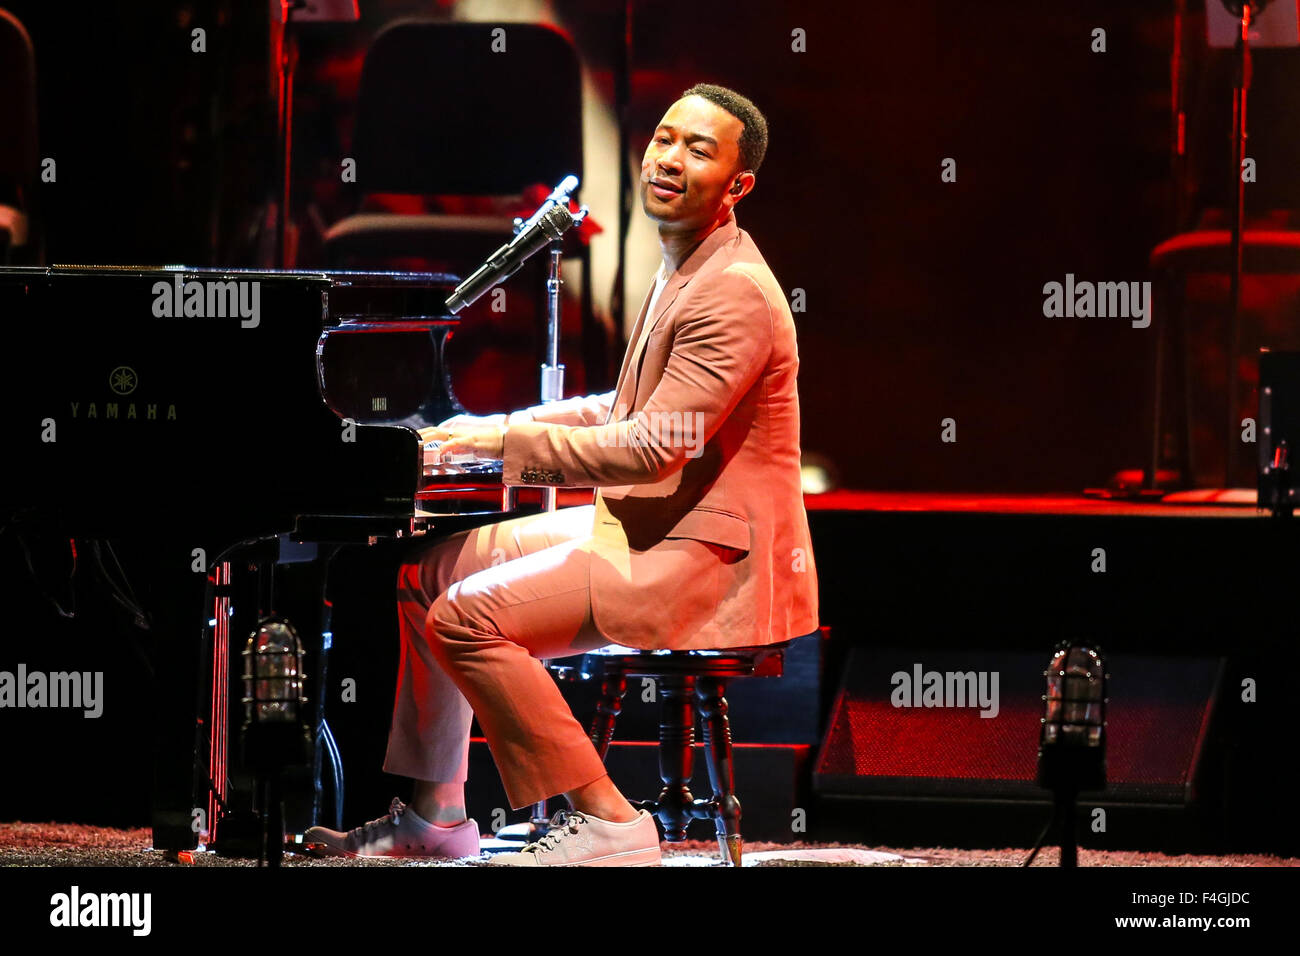 Music Artist JOHN LEGEND performs at the Red Hat Amphitheater in North Carolina.  John Roger Stephens (born December 28, 1978), better known by his stage name John Legend, is an American singer-songwriter and actor. Stock Photo